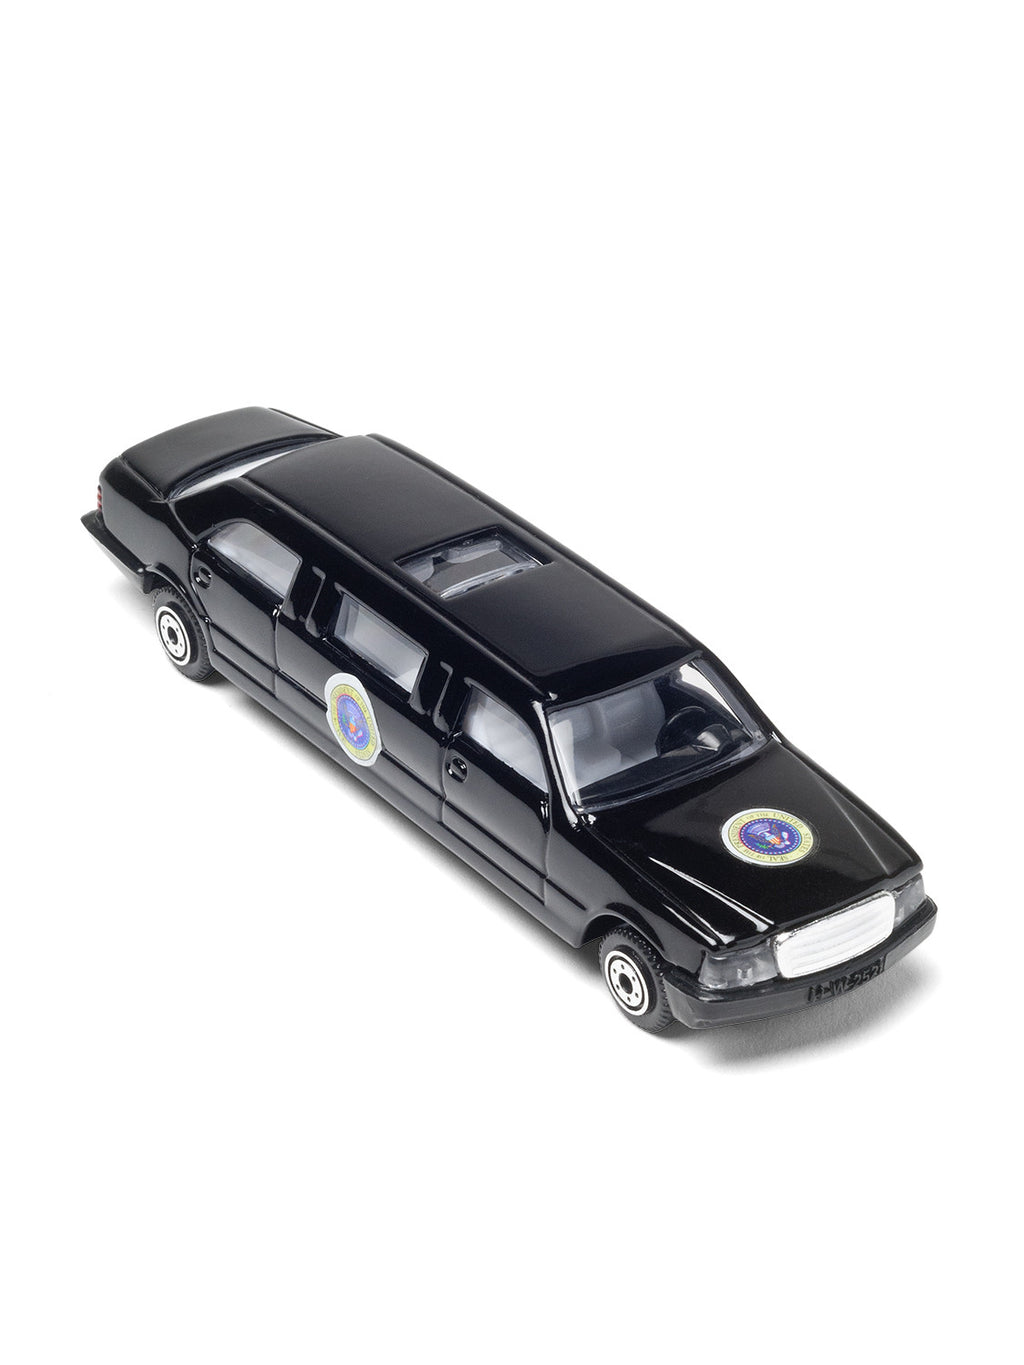 US Presidential Limousine Diecast Pullback with Lights 